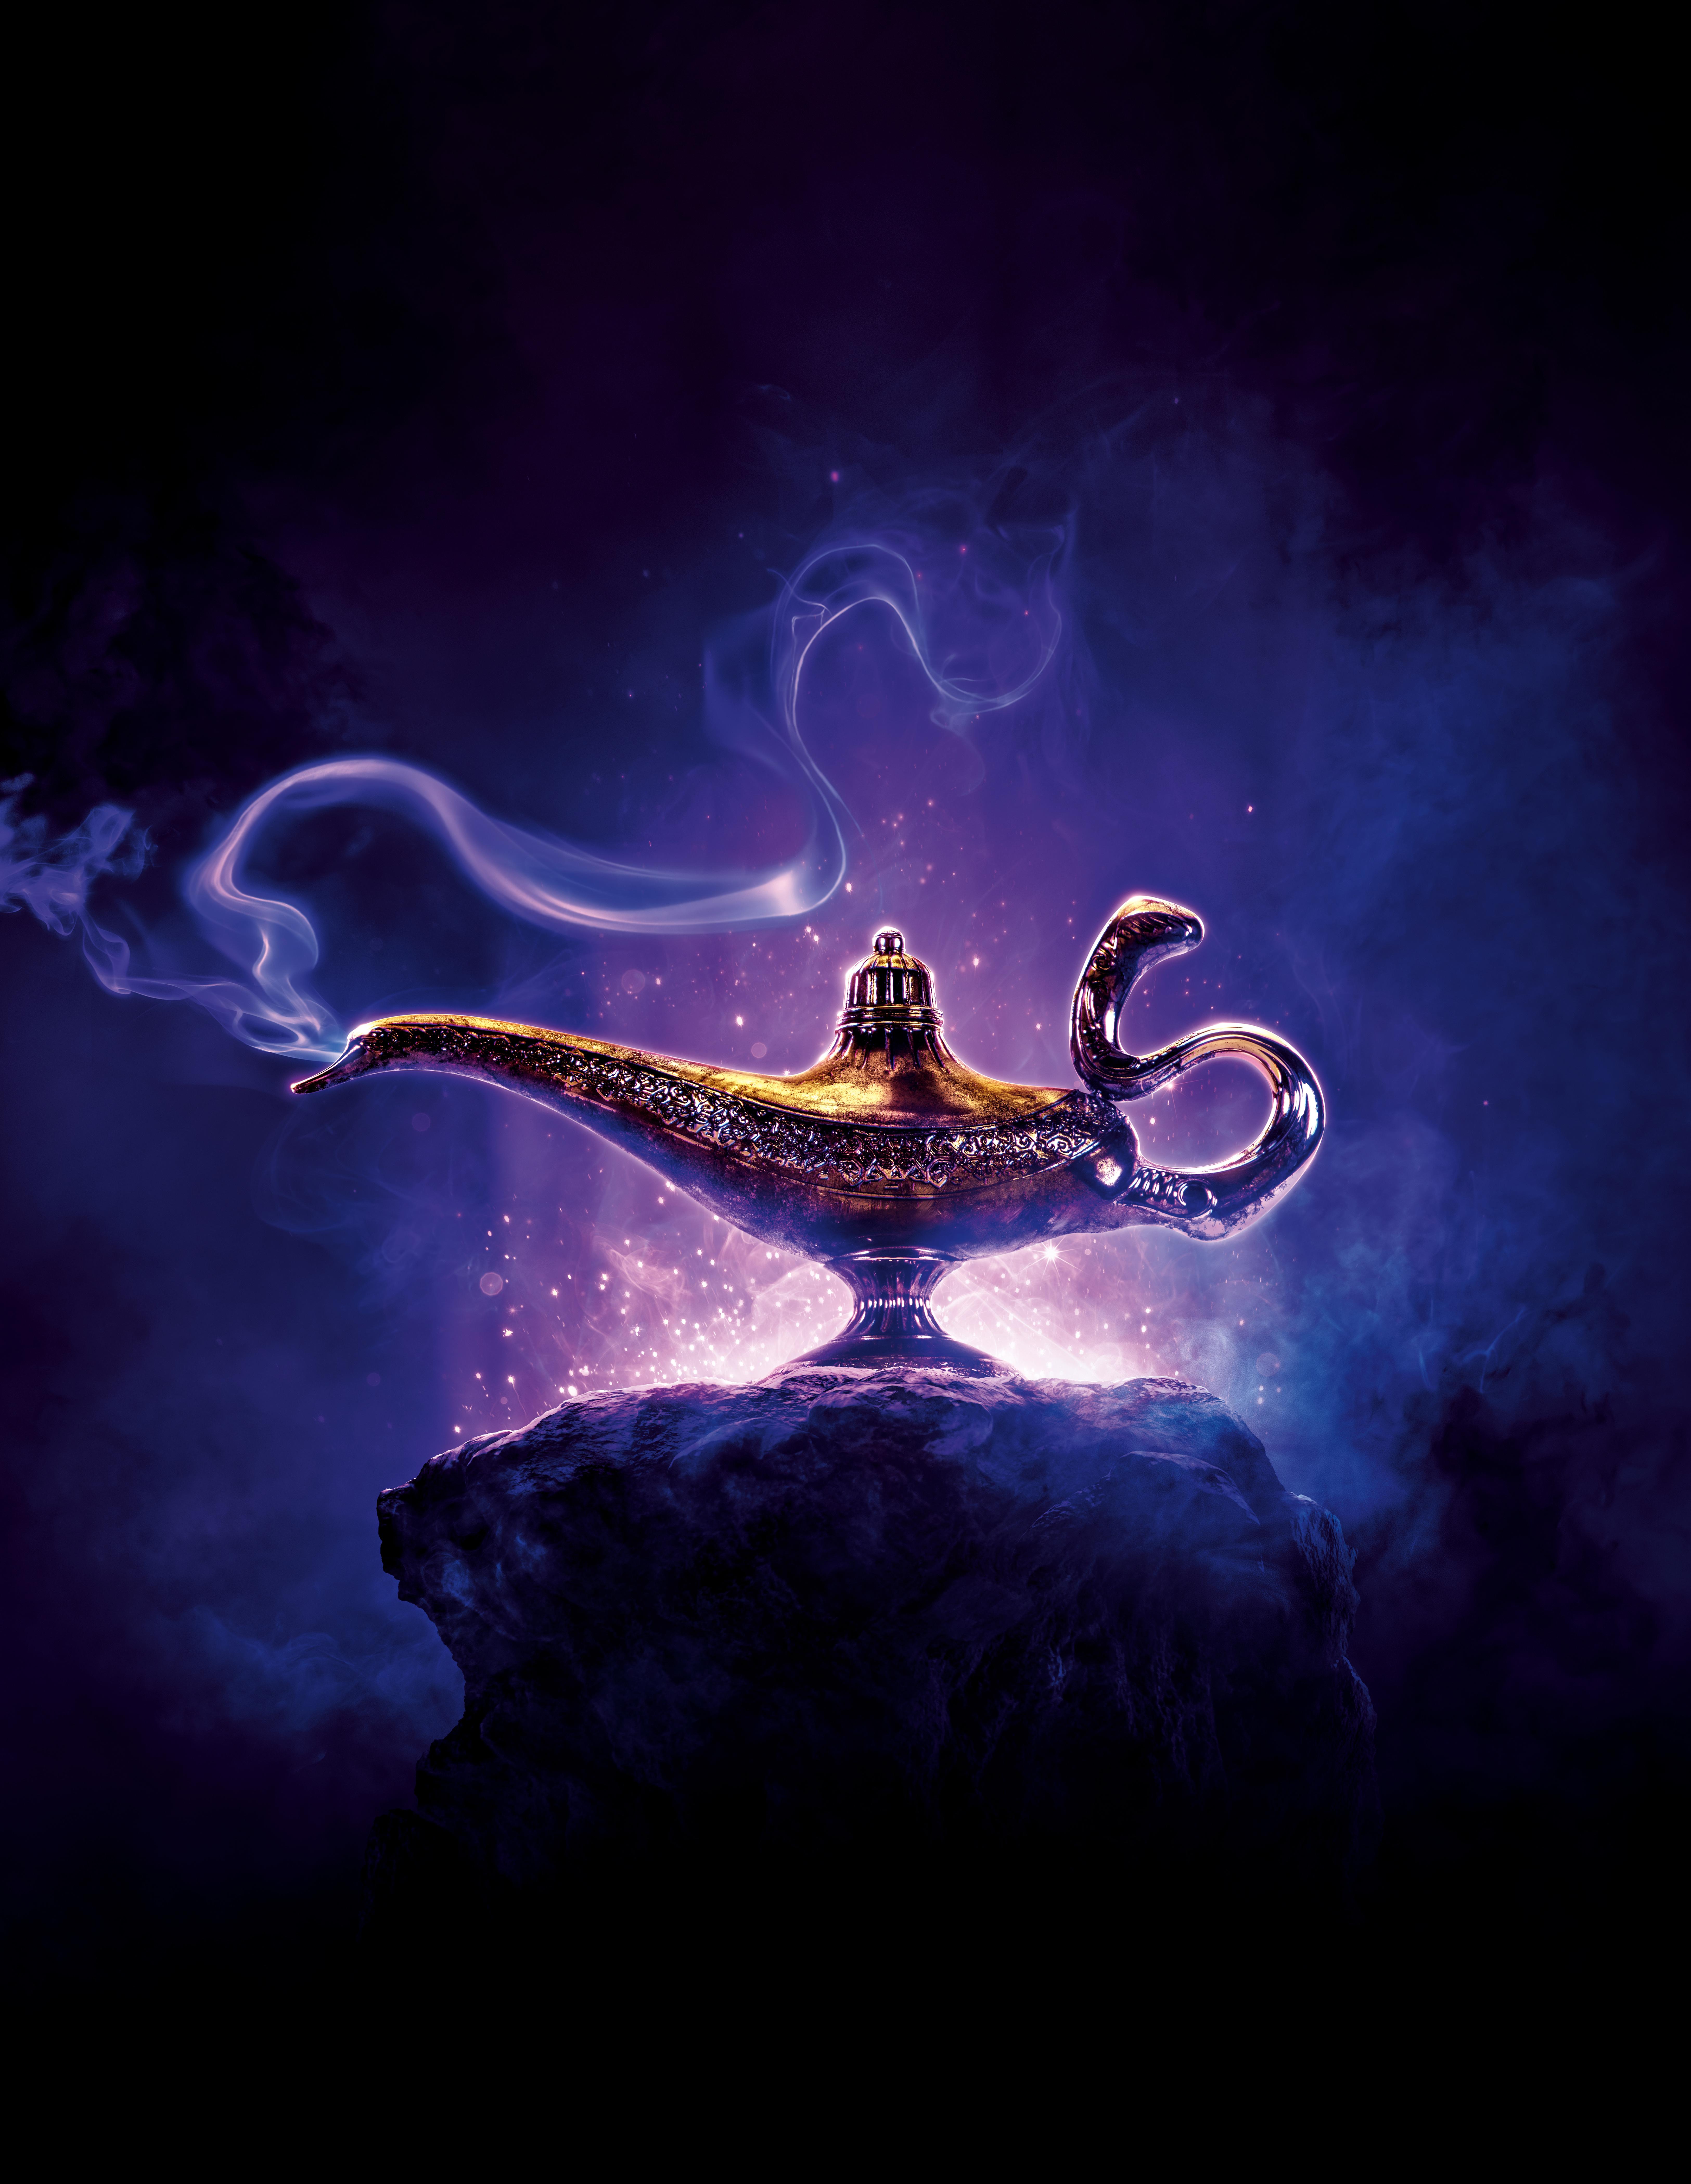 Wallpaper Aladdin, Disney, 4K, Movies,. Wallpaper for iPhone, Android, Mobile and Desktop